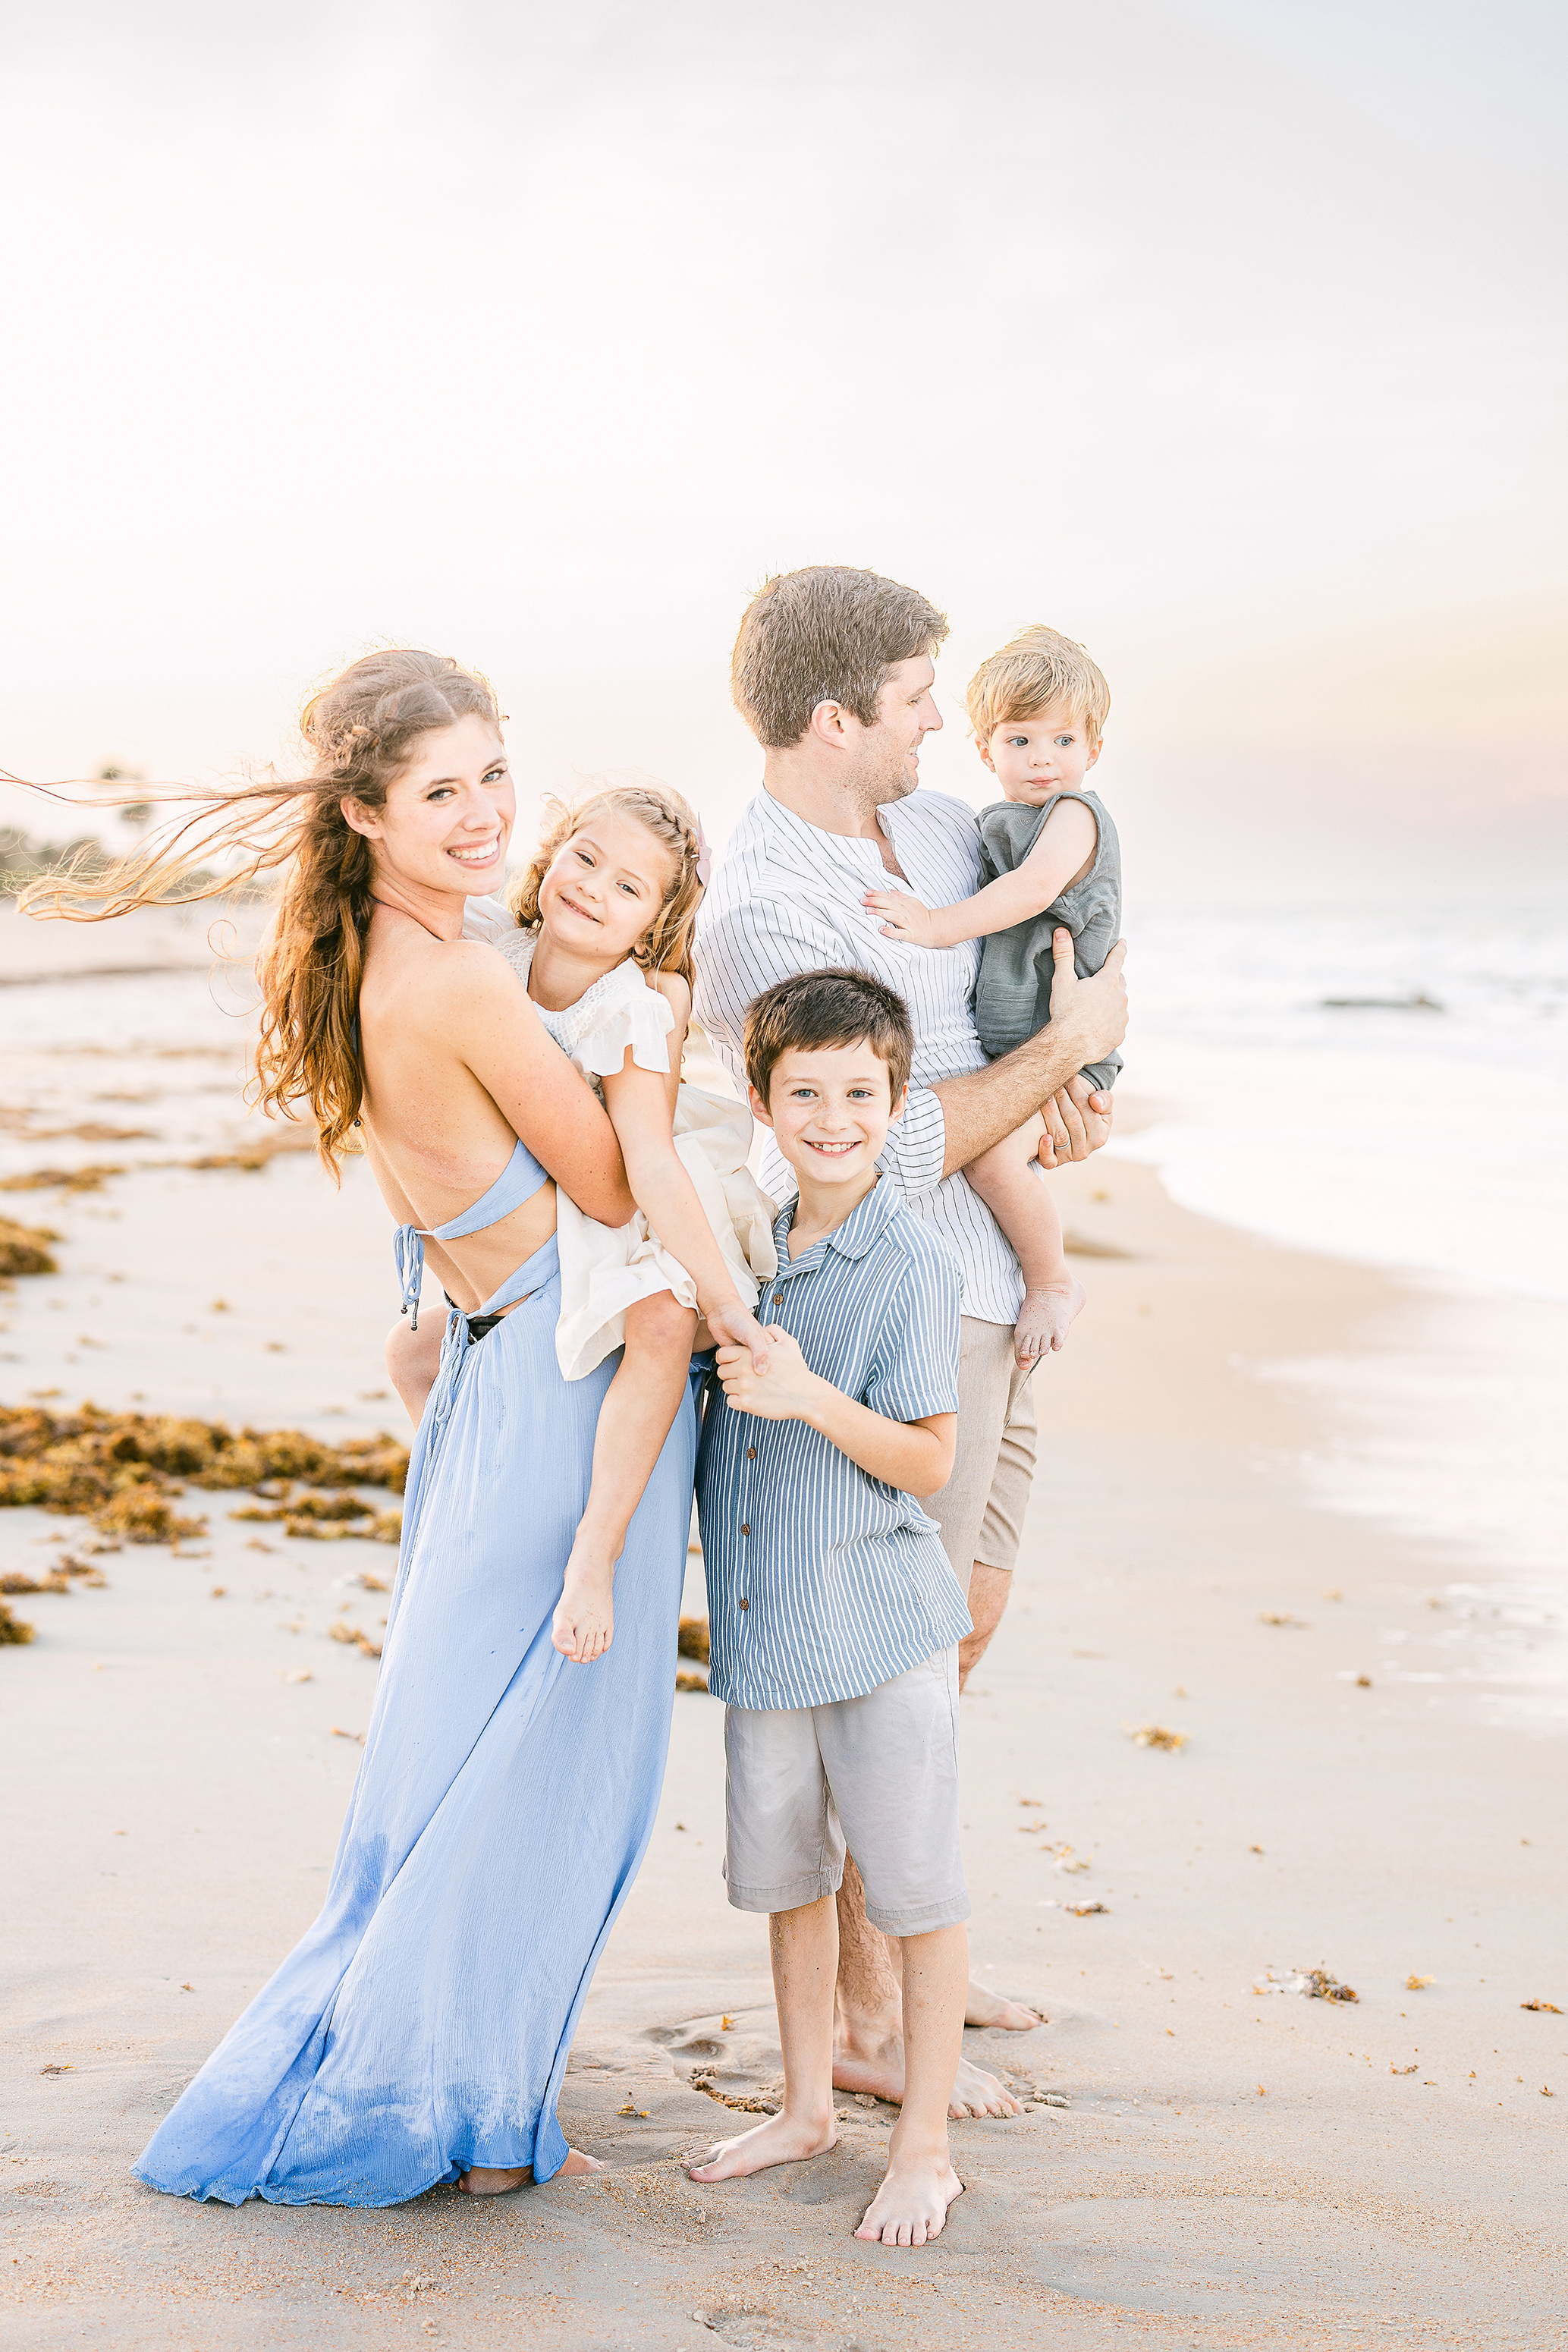 light and airy family beach portrait at sunset